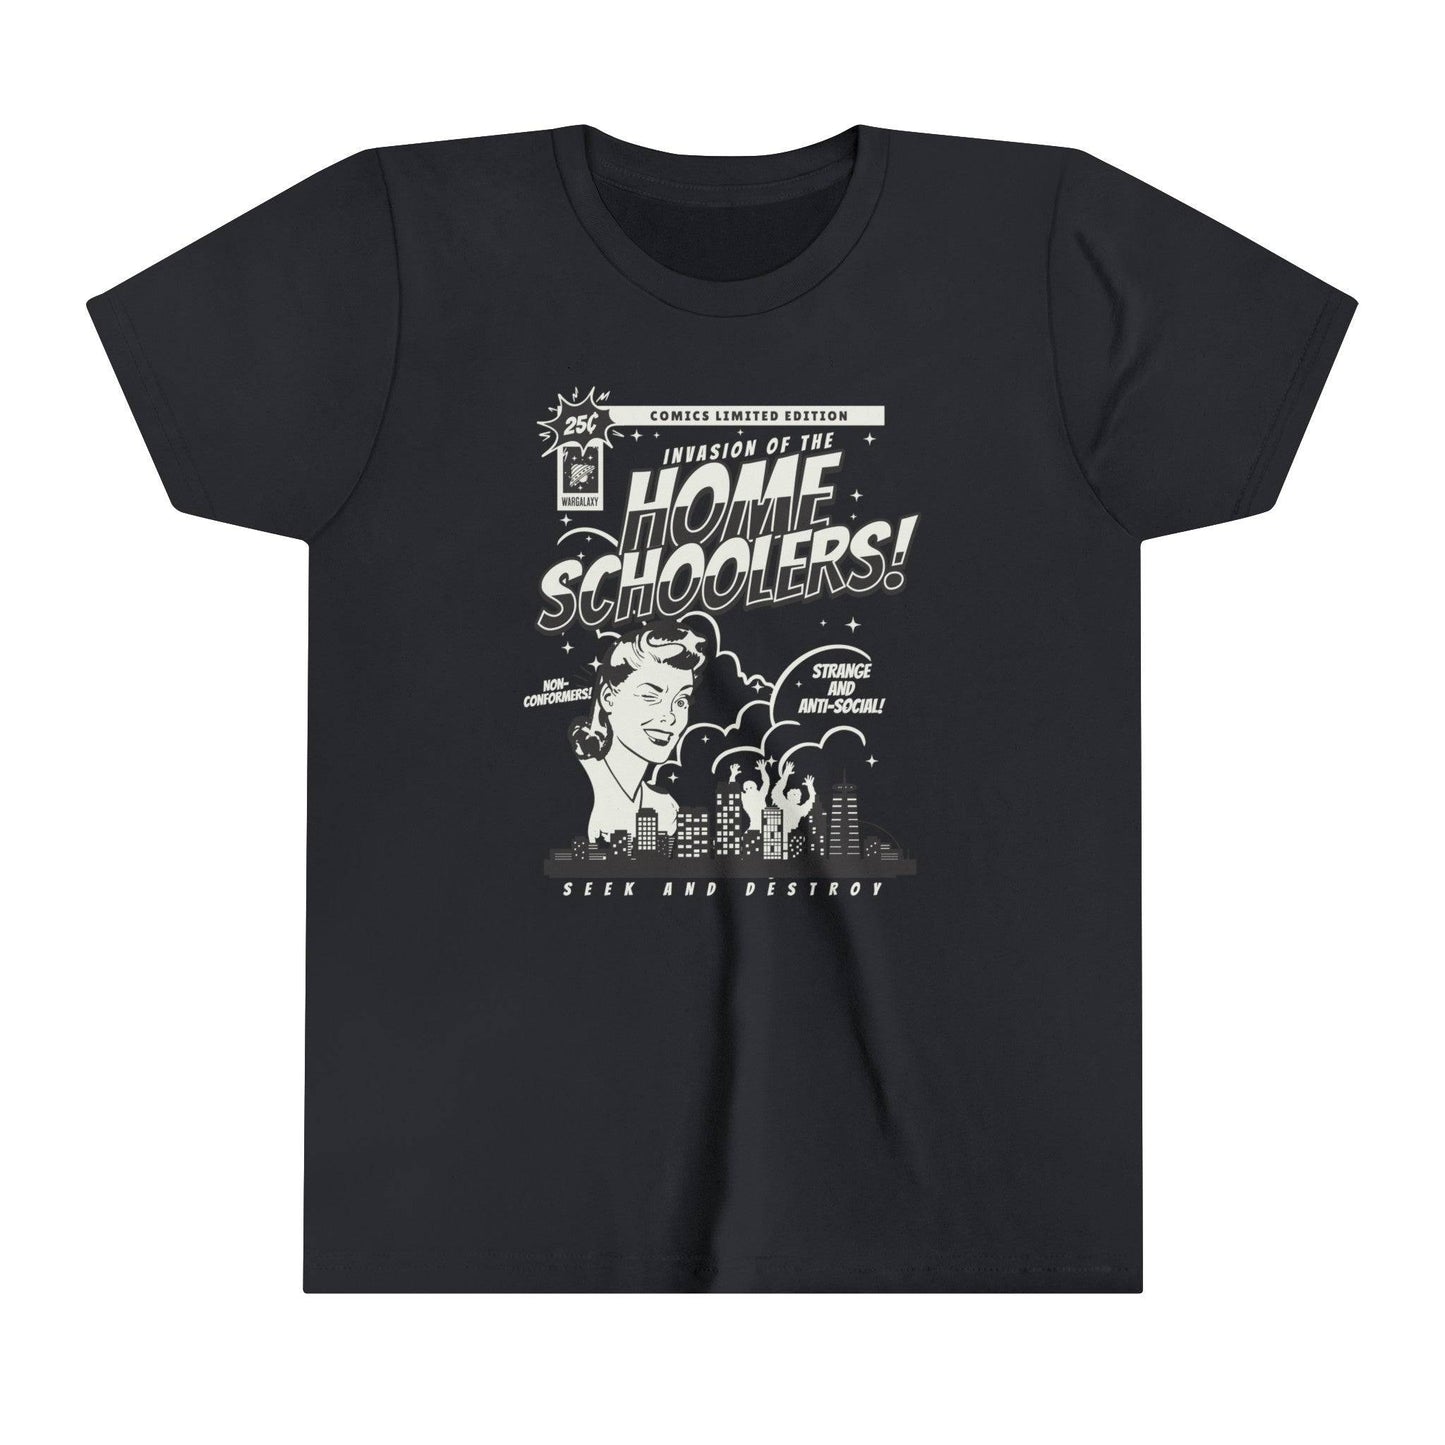 Invasion of the Homeschoolers! Youth Short Sleeve Tee Shirt